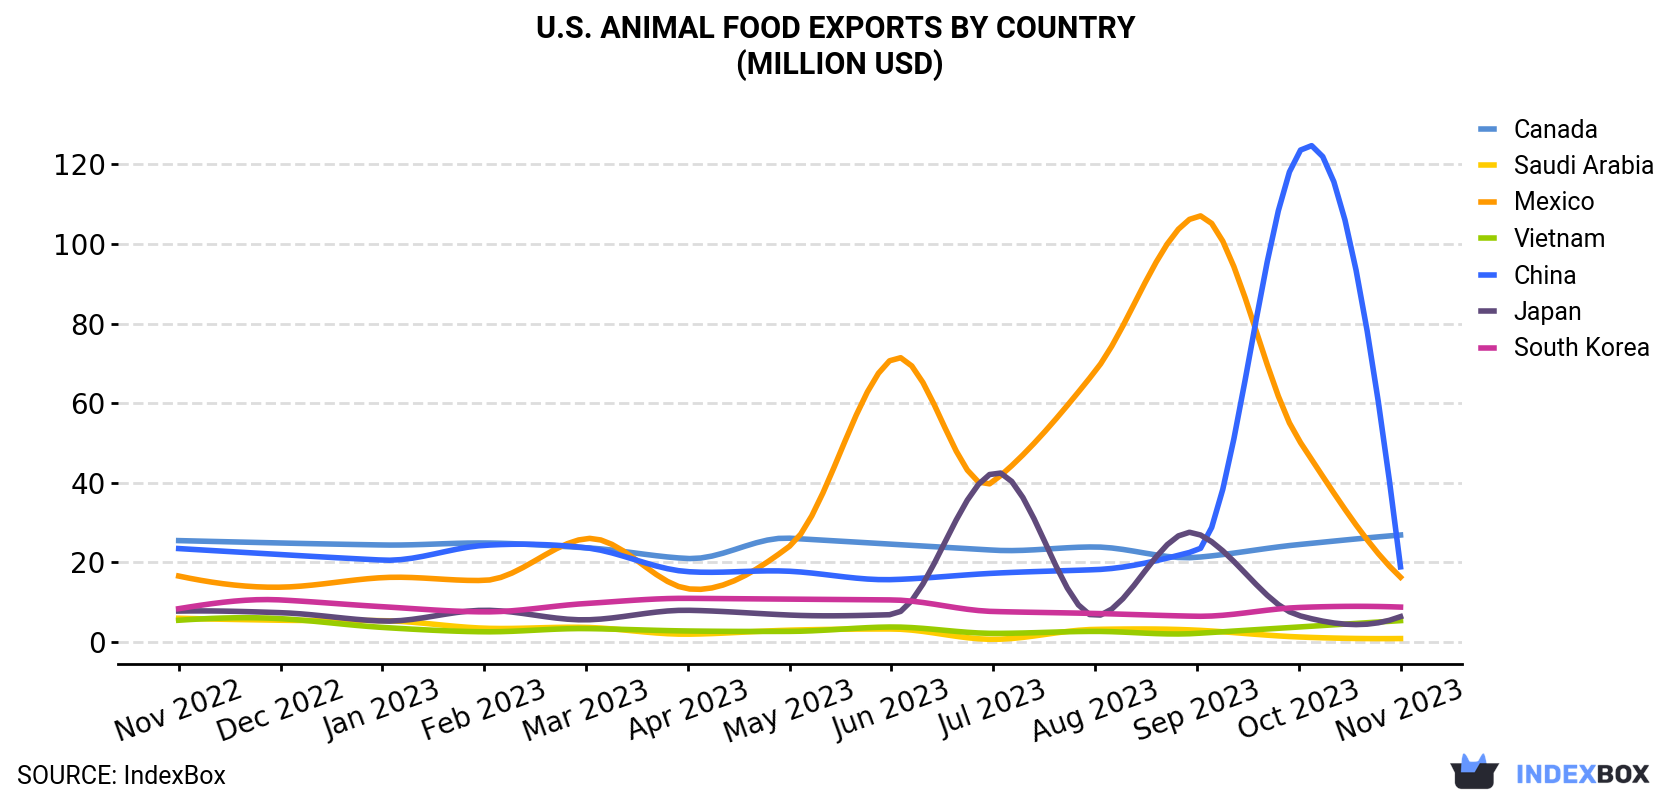 U.S. Animal Food Exports By Country (Million USD)